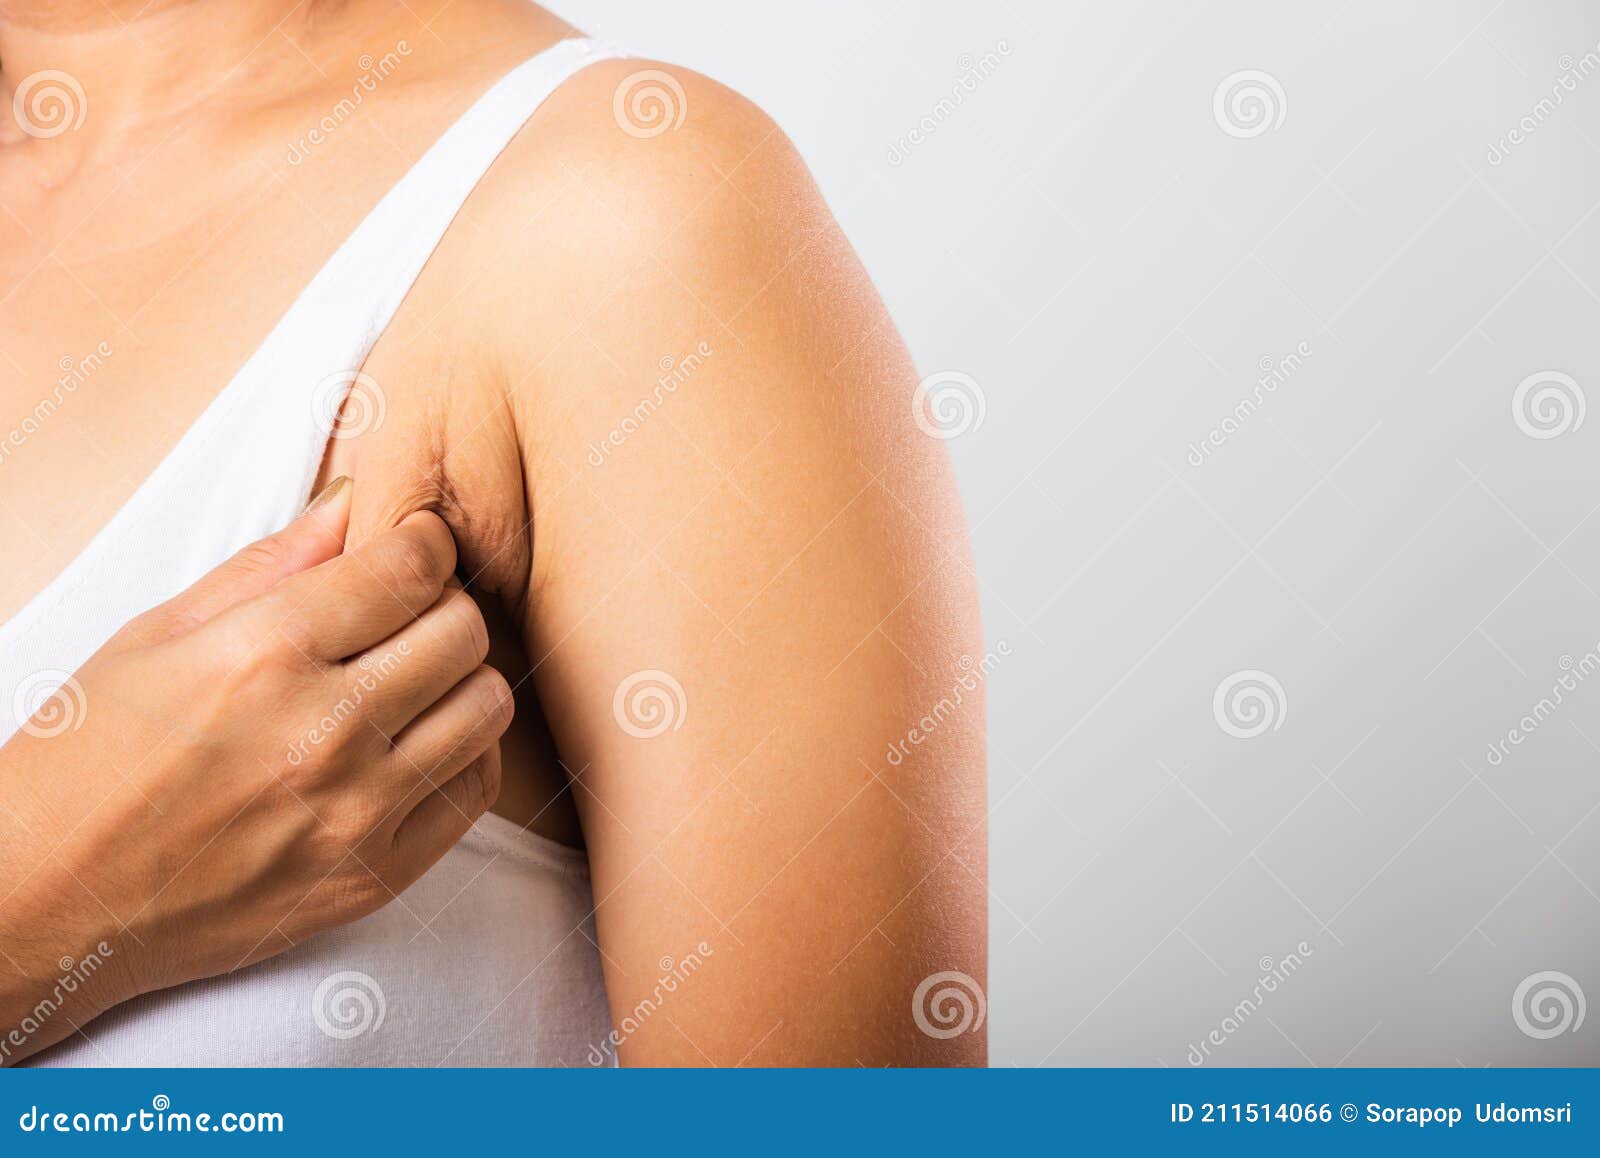 Woman Pulling Her Skin Underarm she Problem Armpit Fat Underarm Wrinkled  Skin Stock Photo - Image of girl, background: 211514066